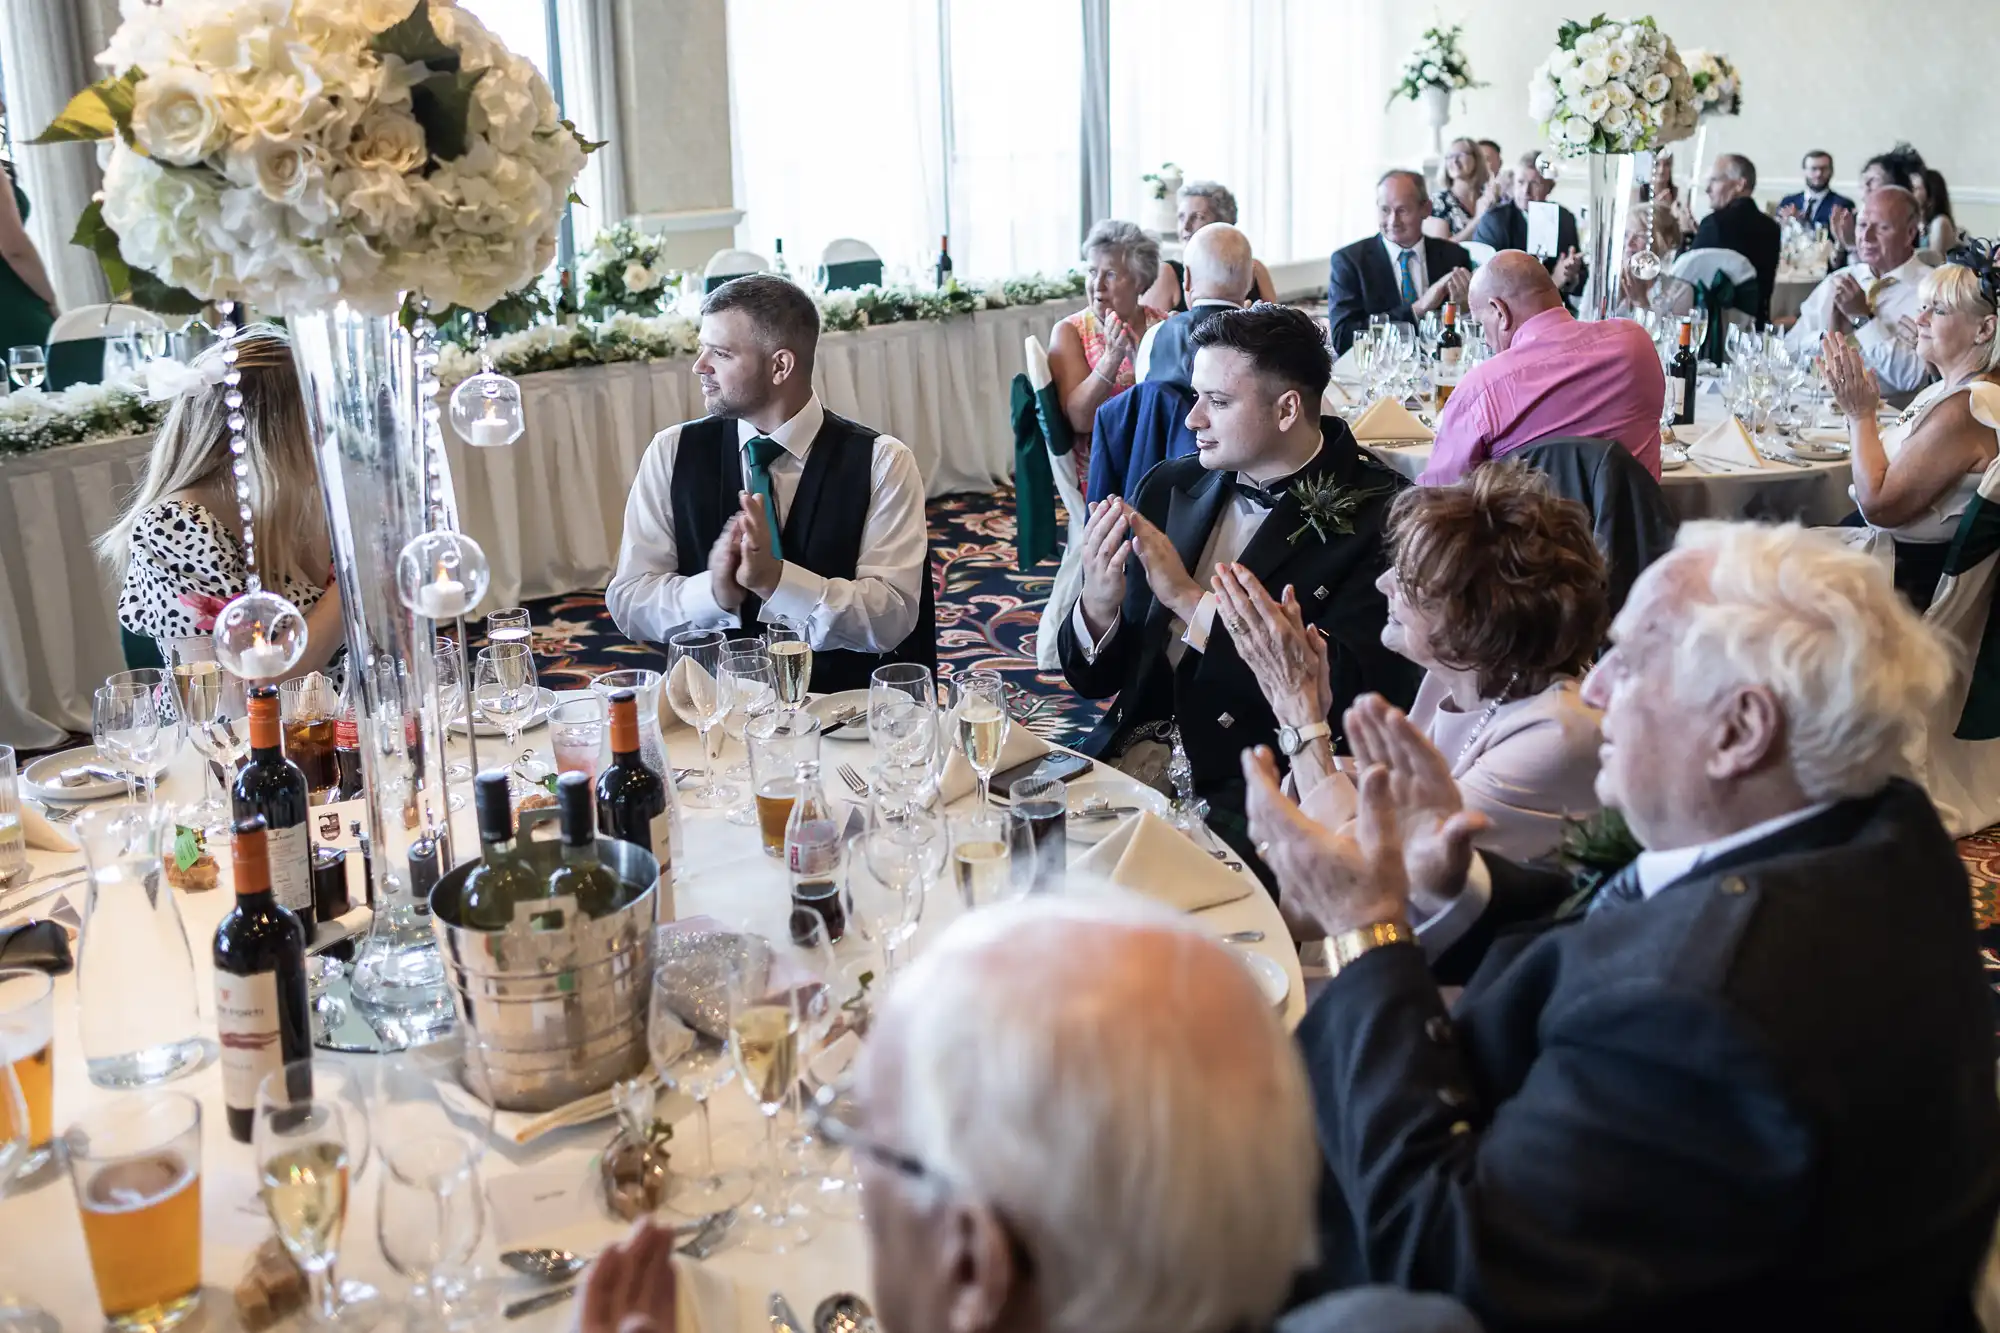 Guests at a wedding reception clapping, with two men at the foreground looking at each other, surrounded by tables adorned with floral decorations and wine.